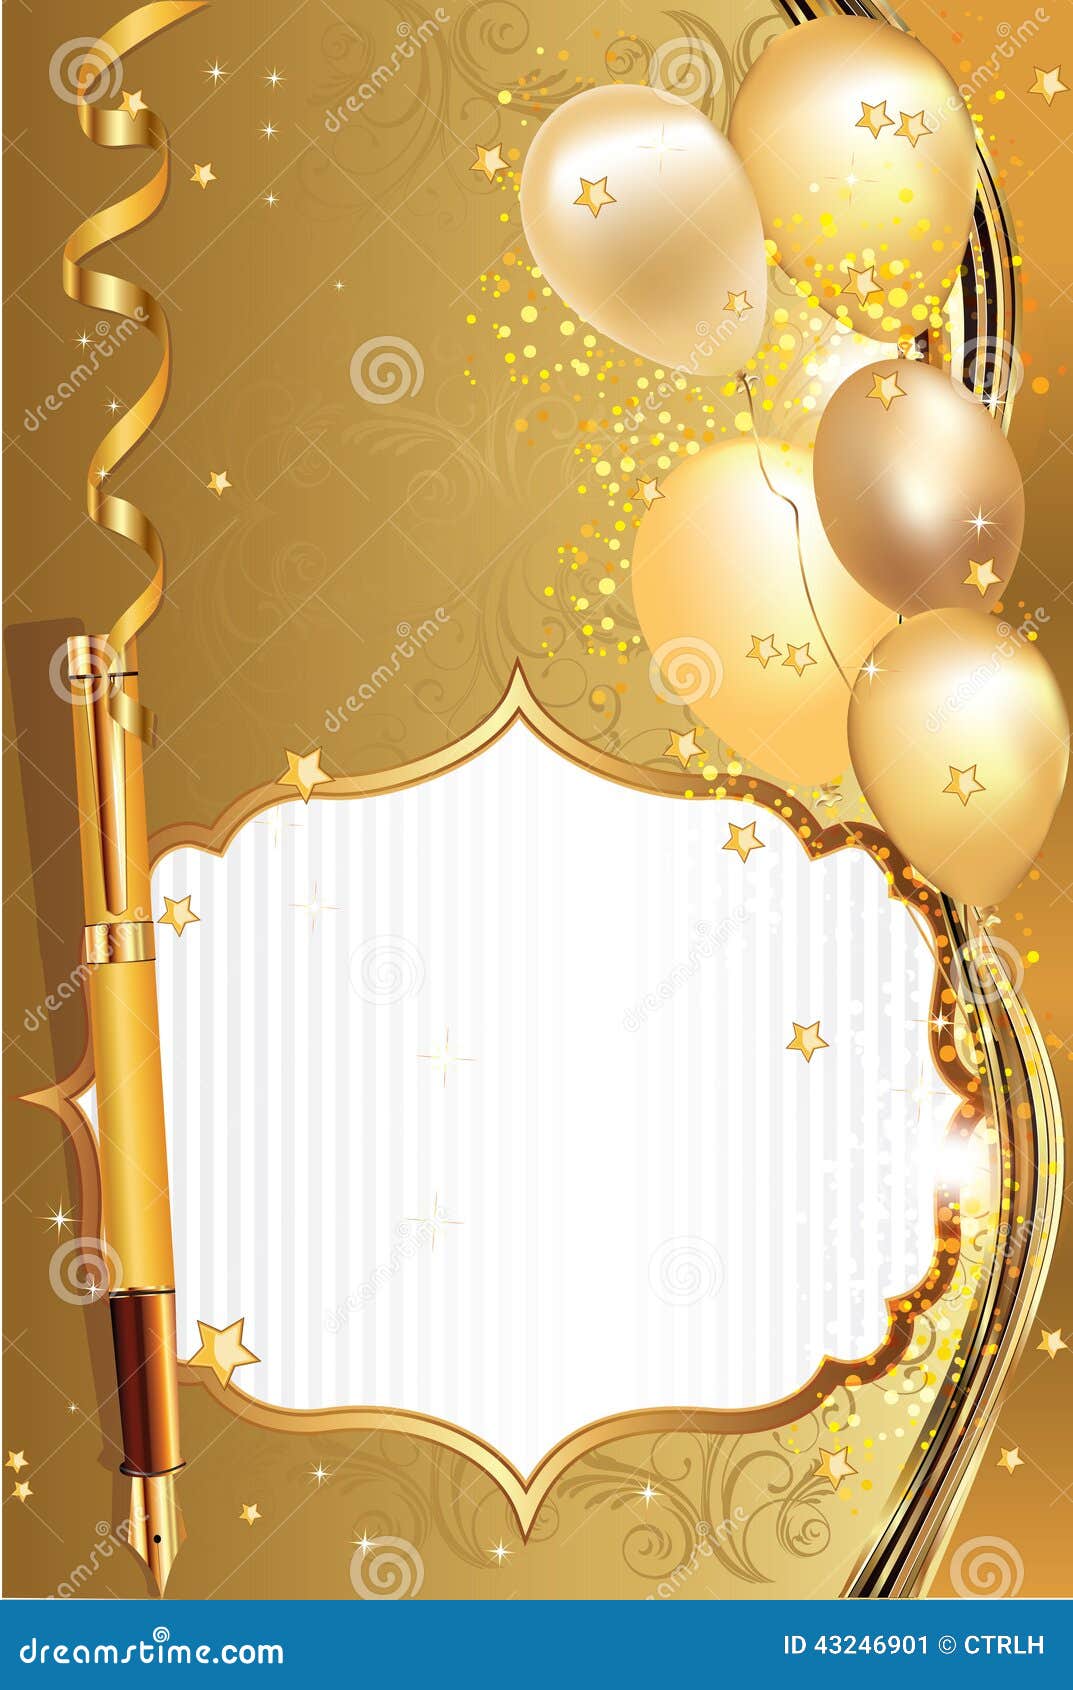 Light Brown Celebration Greeting Card With Balloons Stock 